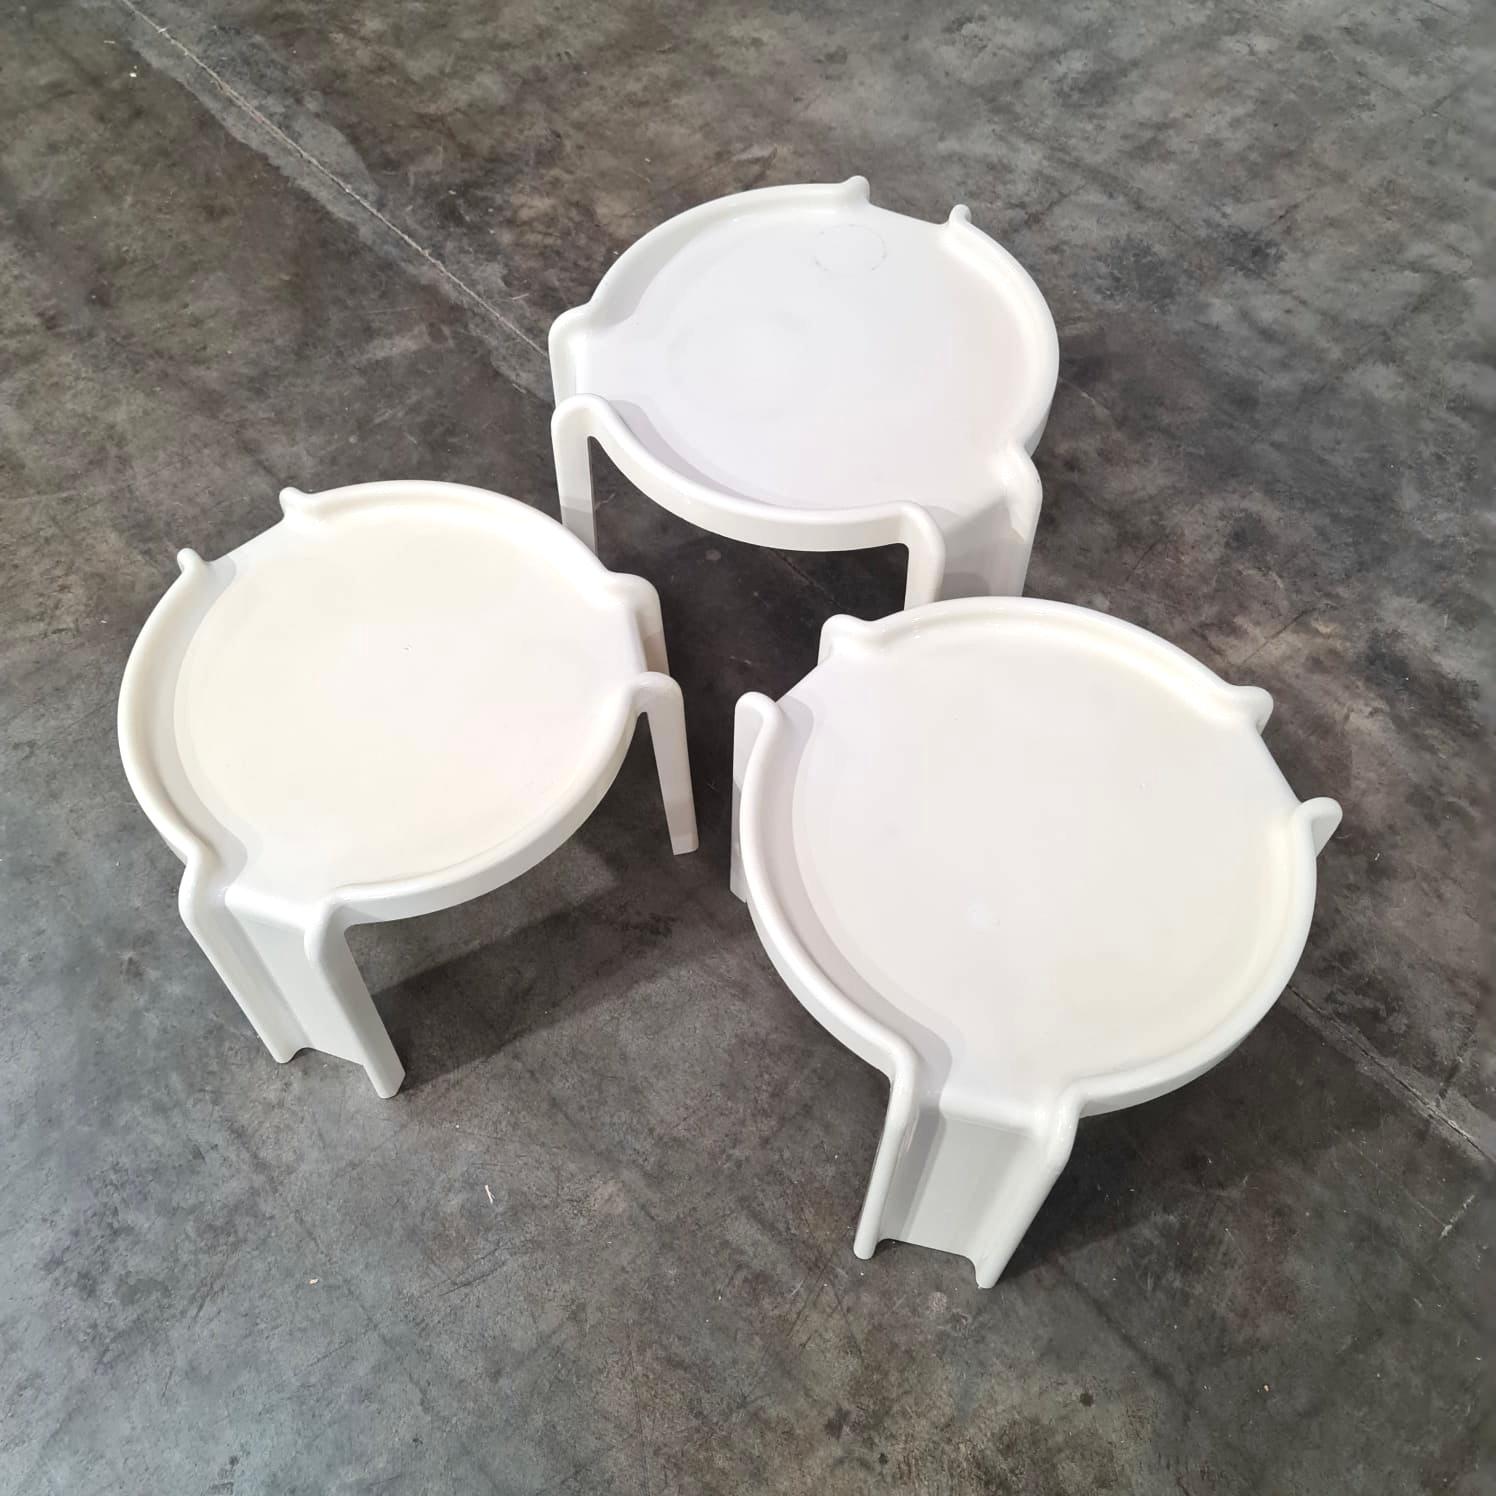 A set of three futuristic or space-age plastic nesting tables by Giotto Stoppino for Kartell. Made in Australia circa 1970's and stamped underneath. The color I'd say is a cream, off white. The largest table measures 16 x 19 x 19 inches.

Condition: